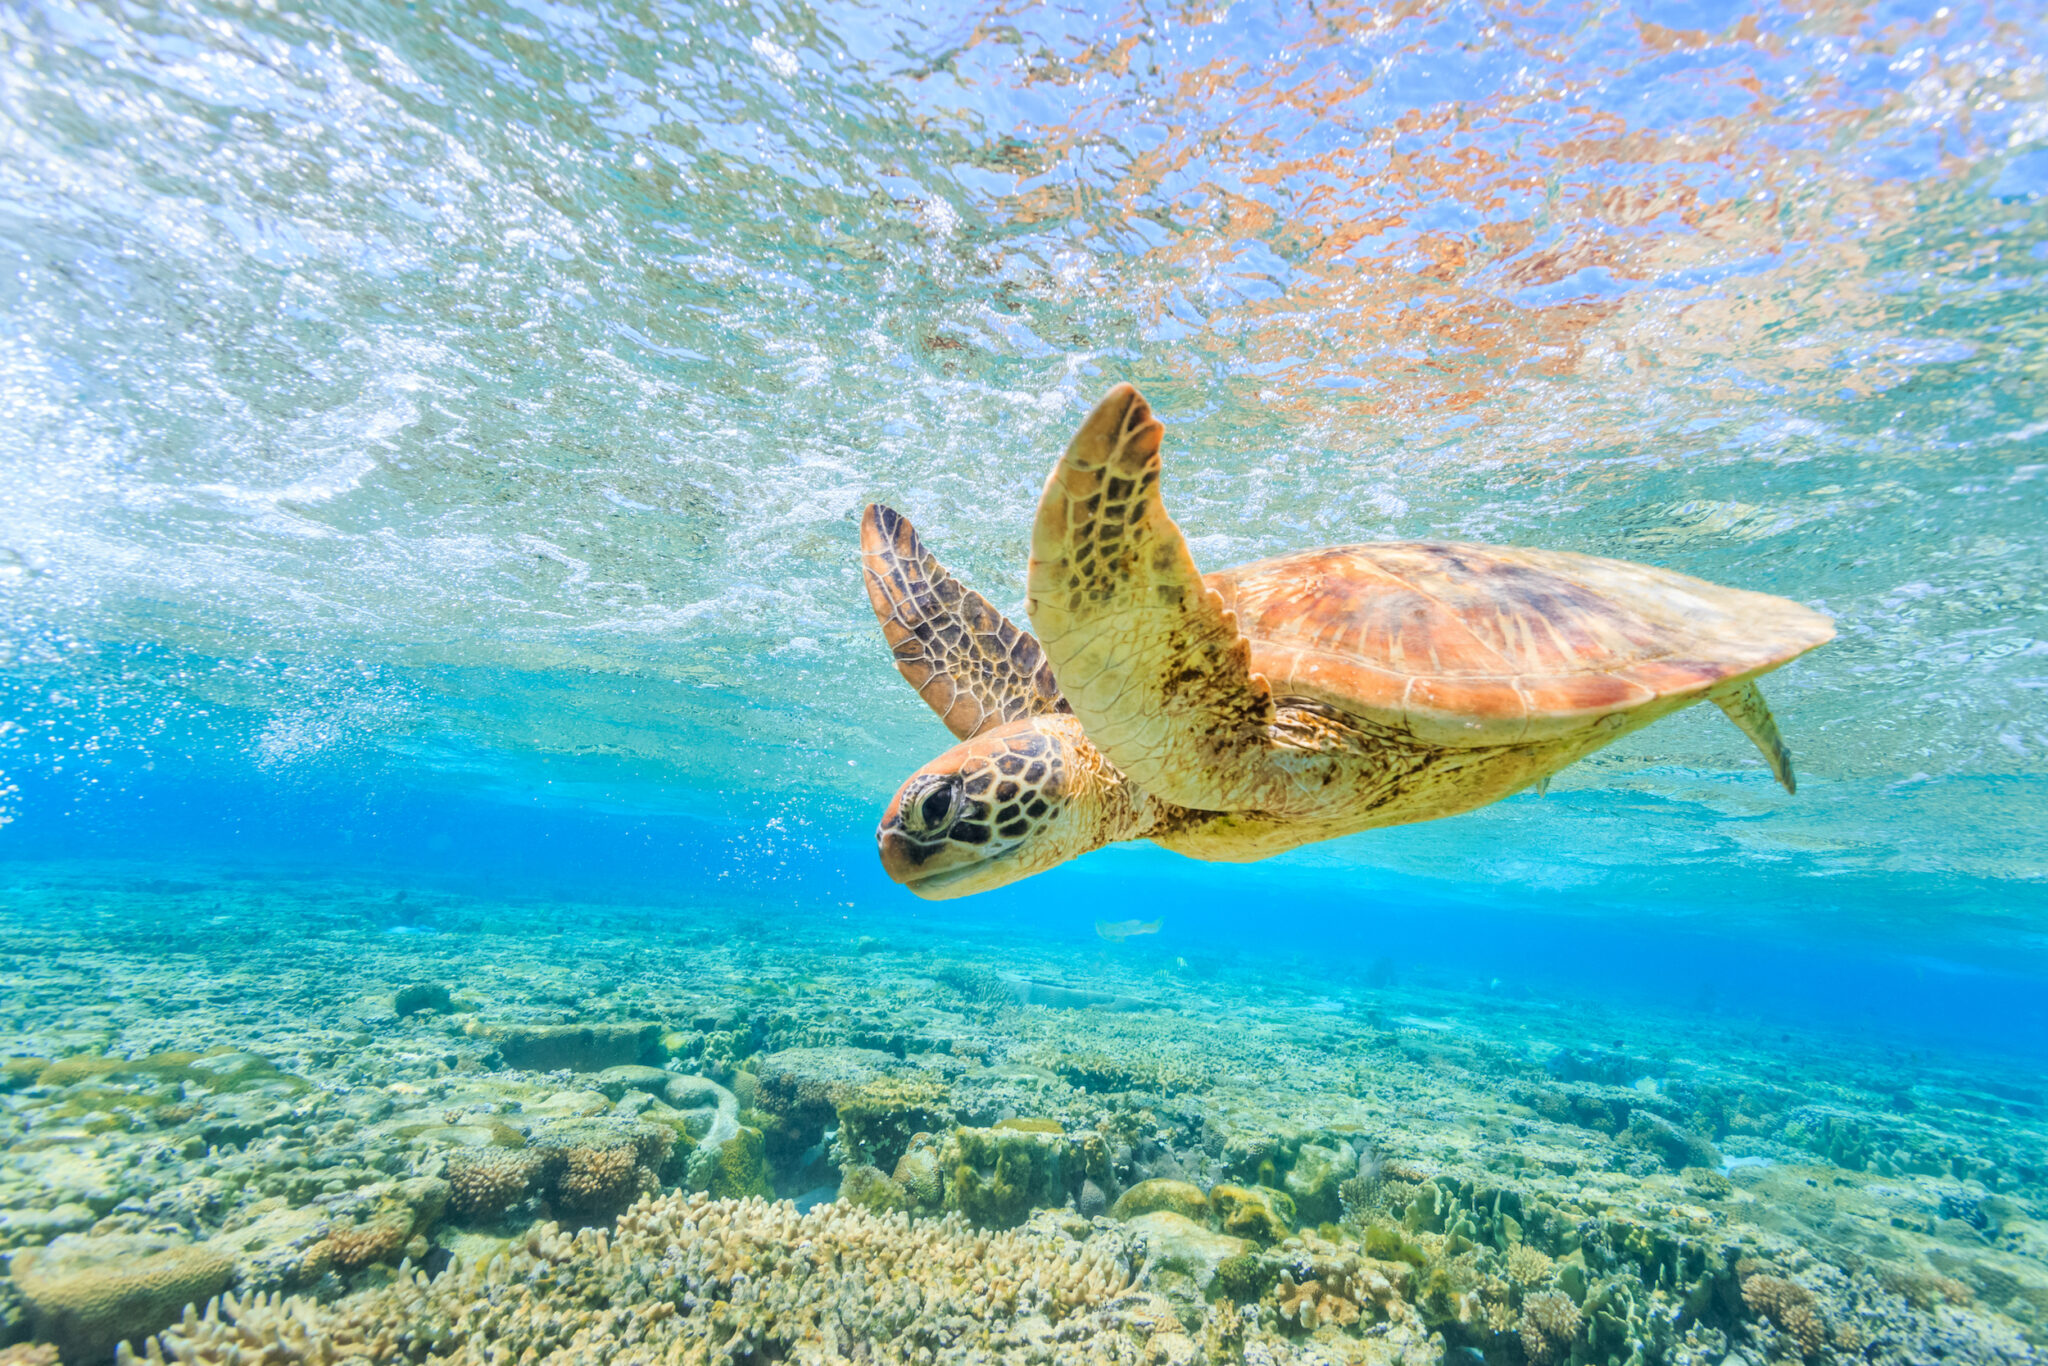 Go Diving and Swimming With Green Sea Turtles